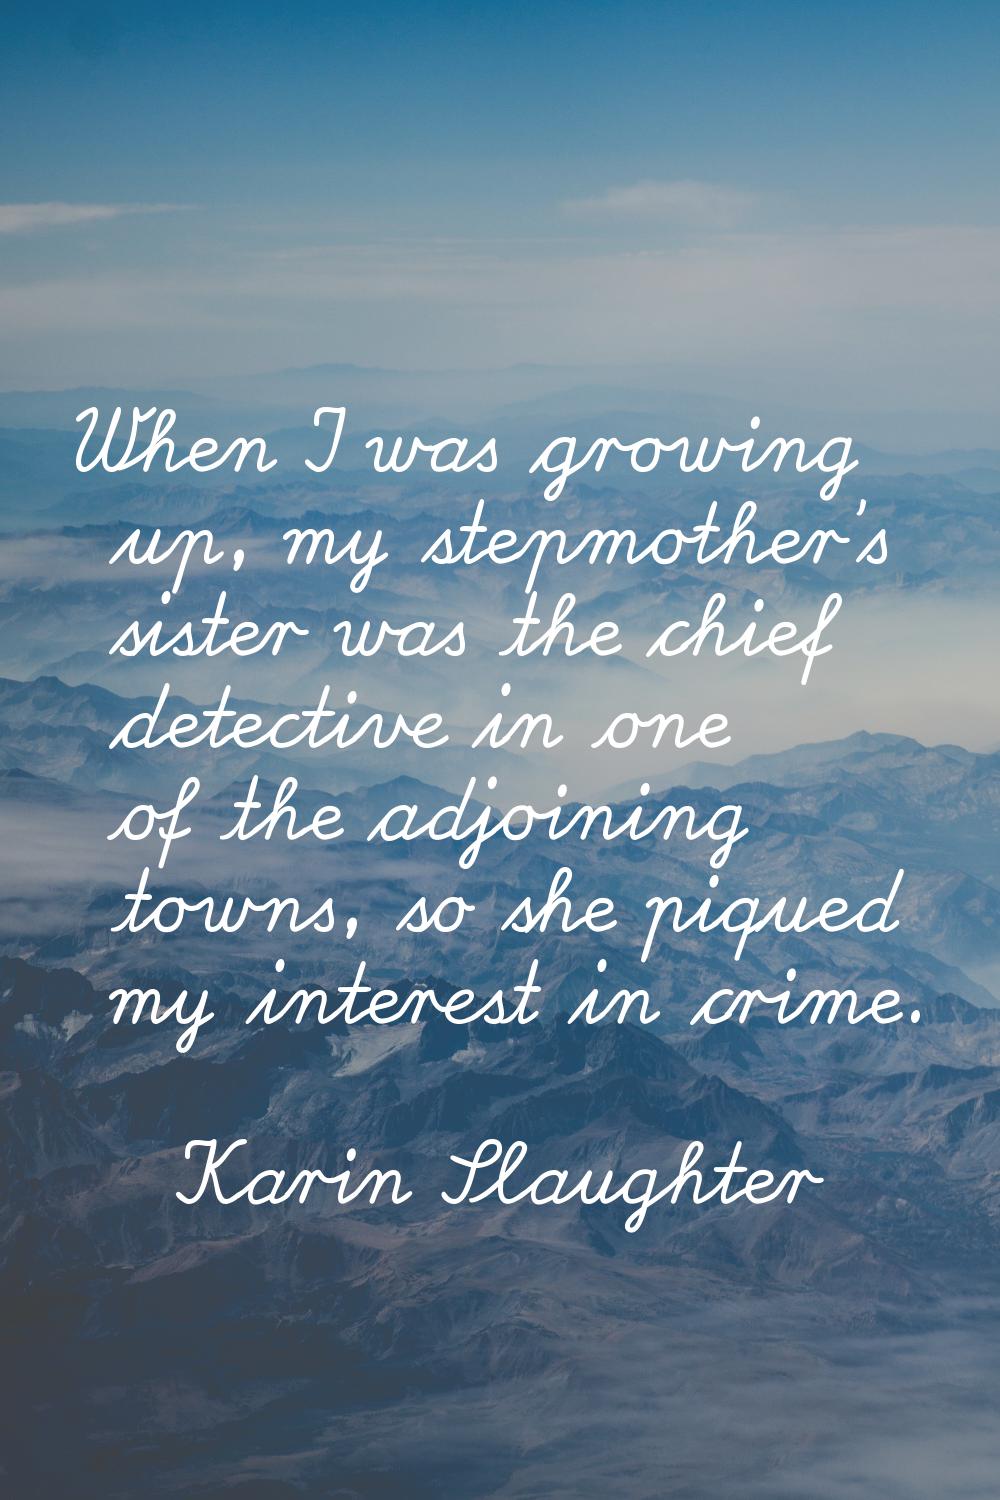 When I was growing up, my stepmother's sister was the chief detective in one of the adjoining towns